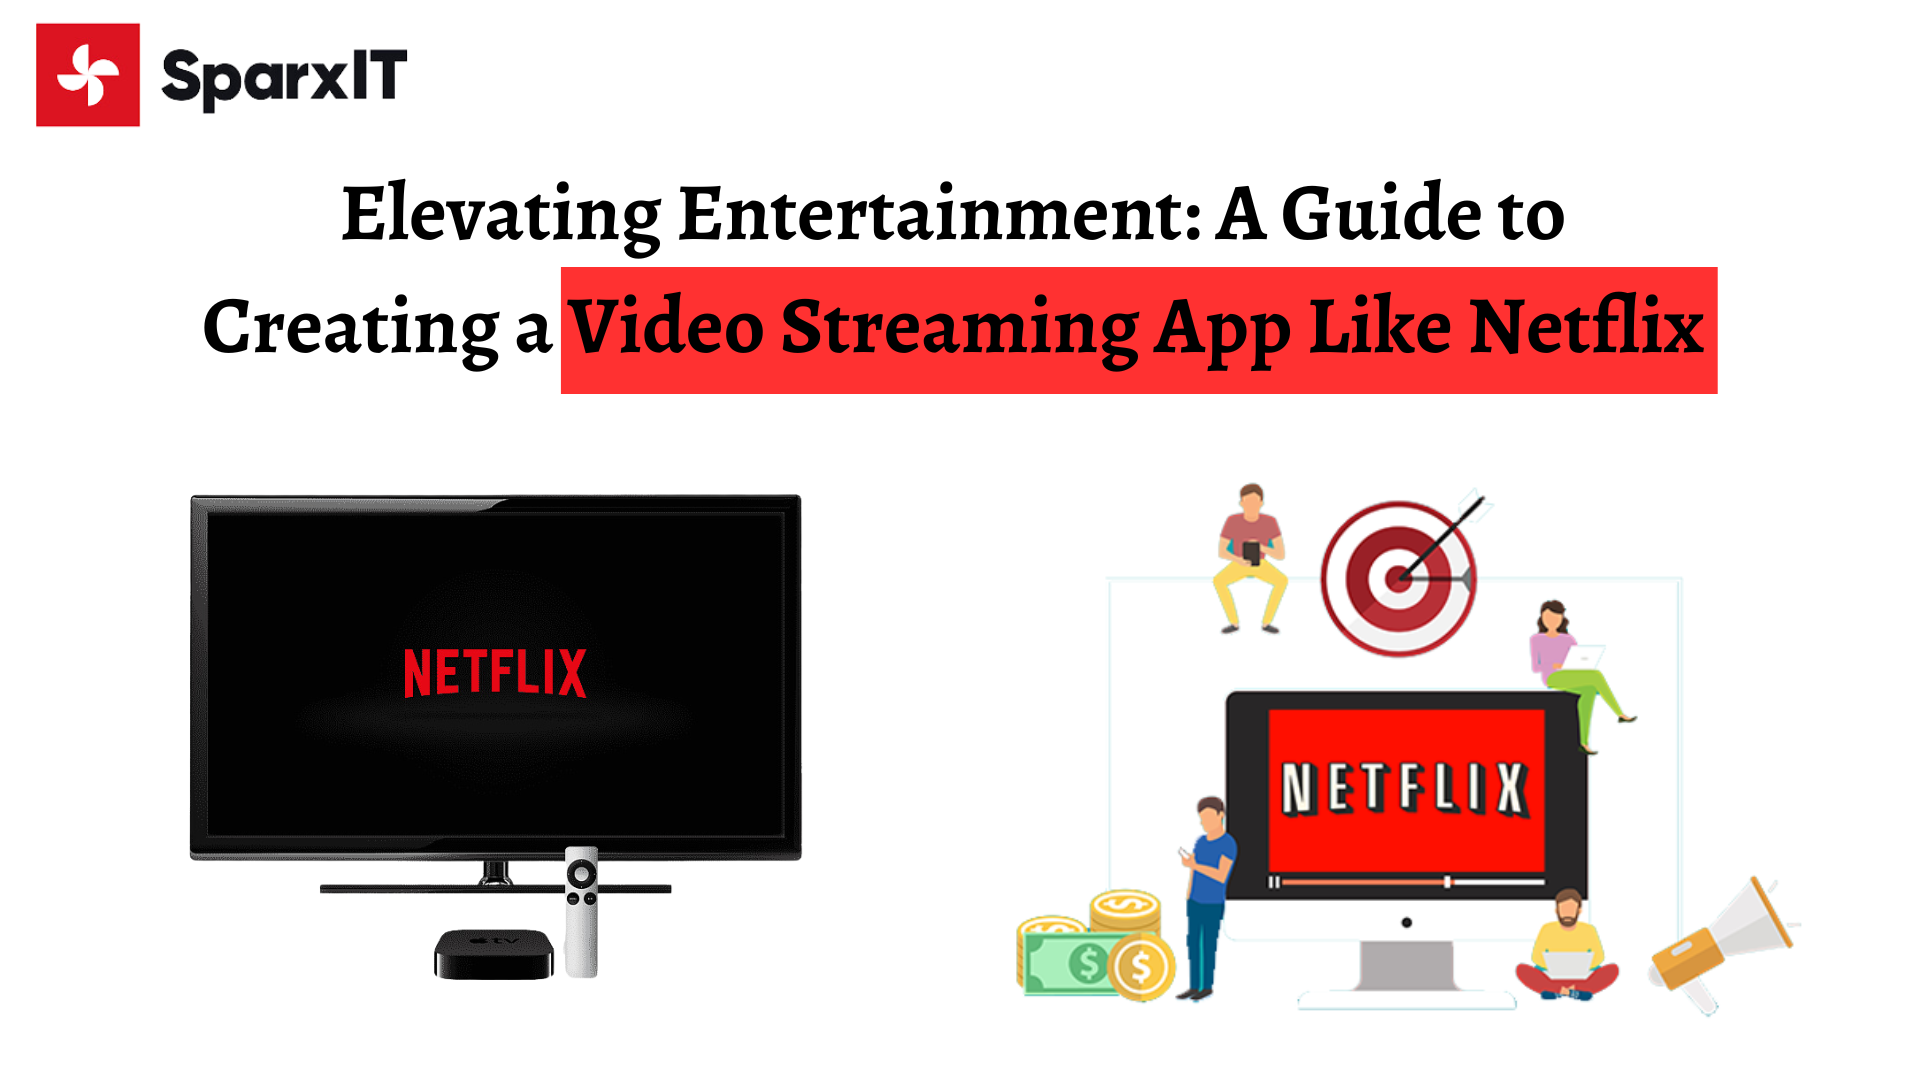 Elevating Entertainment: A Guide to Creating a Video Streaming App Like Netflix